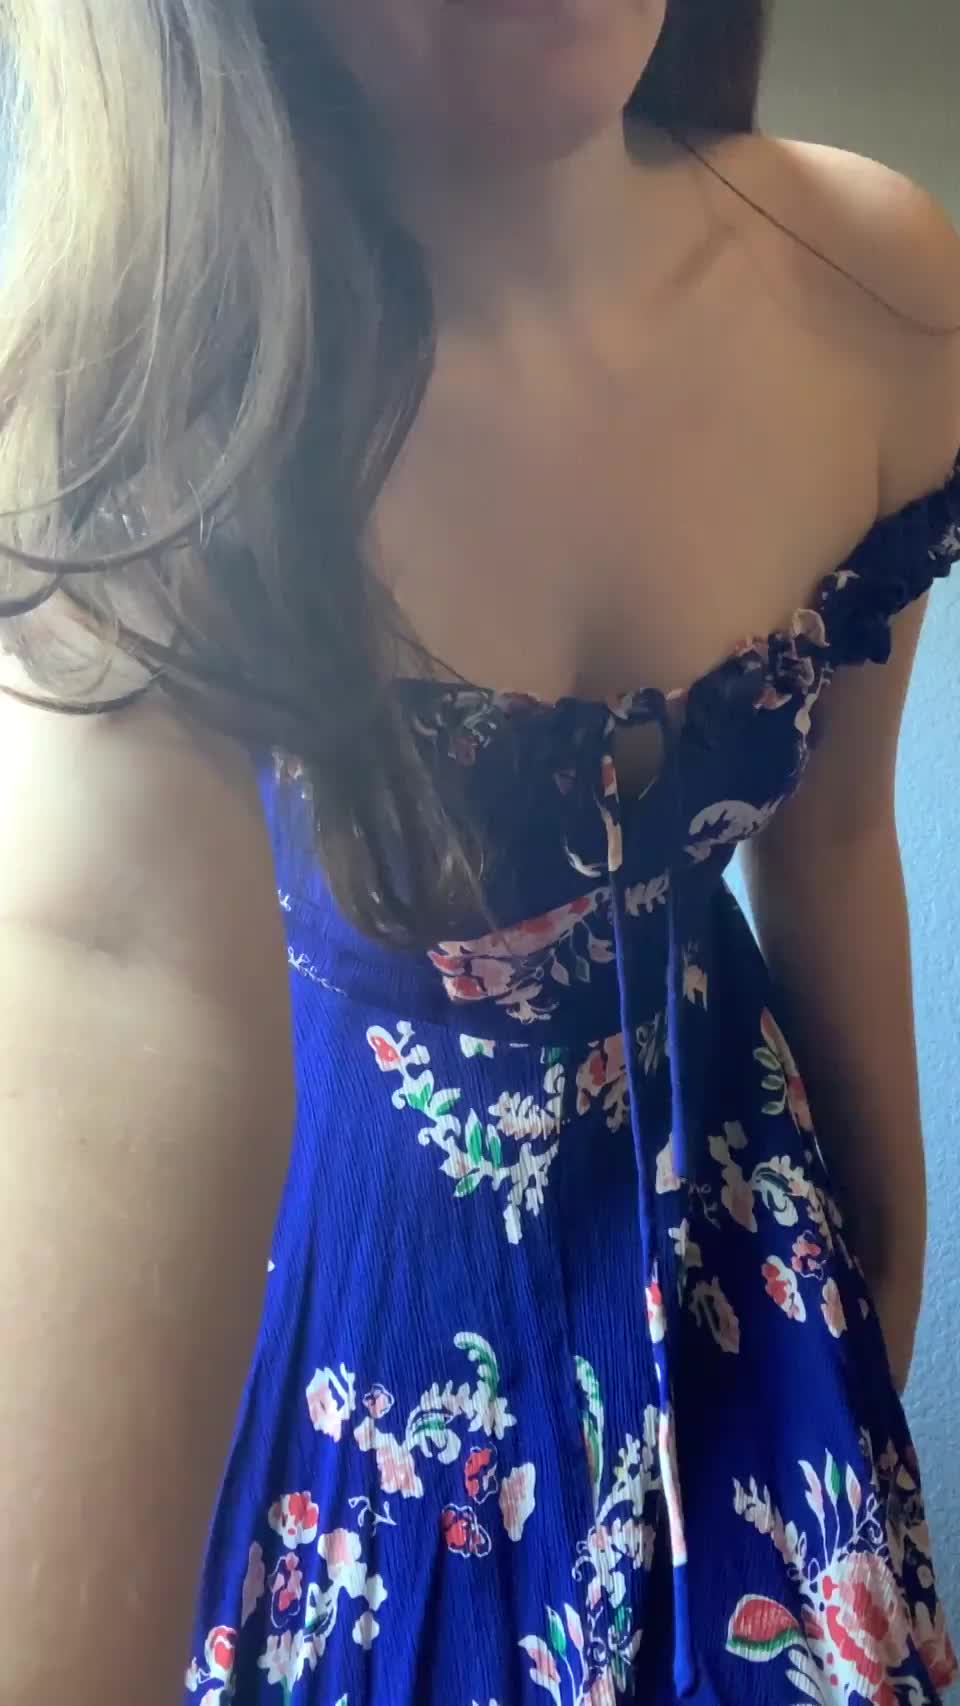 do you like what's under my sundress? 😇 : video clip